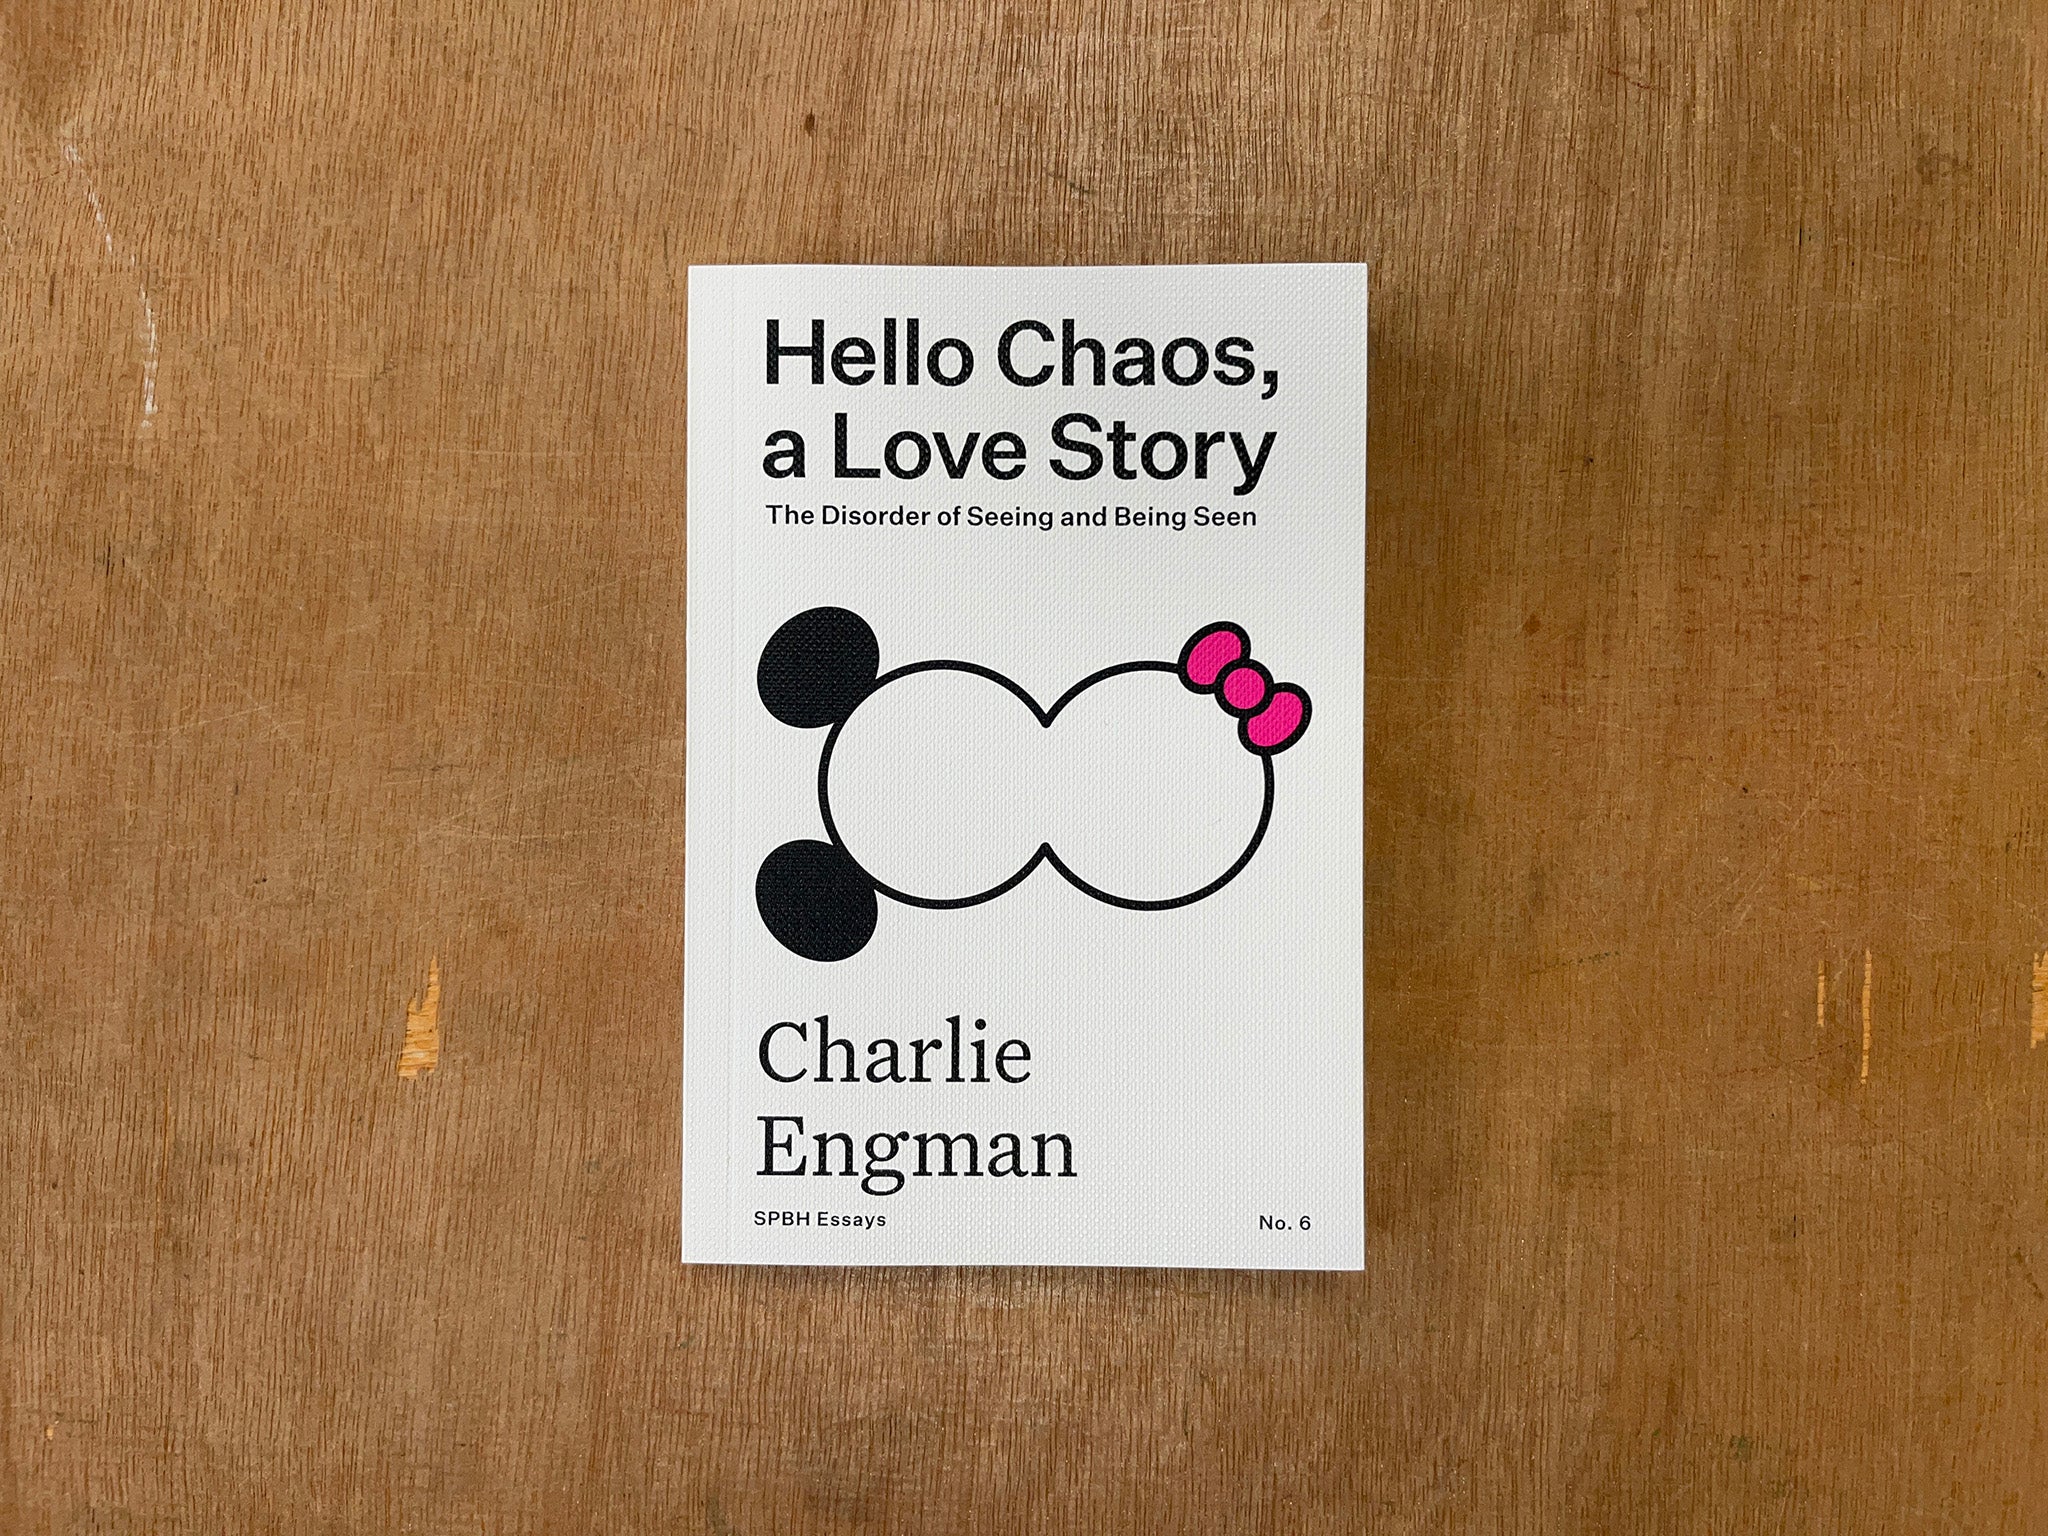 HELLO CHAOS, A LOVE STORY: THE DISORDER OF SEEING AND BEING SEEN by Charlie Engman